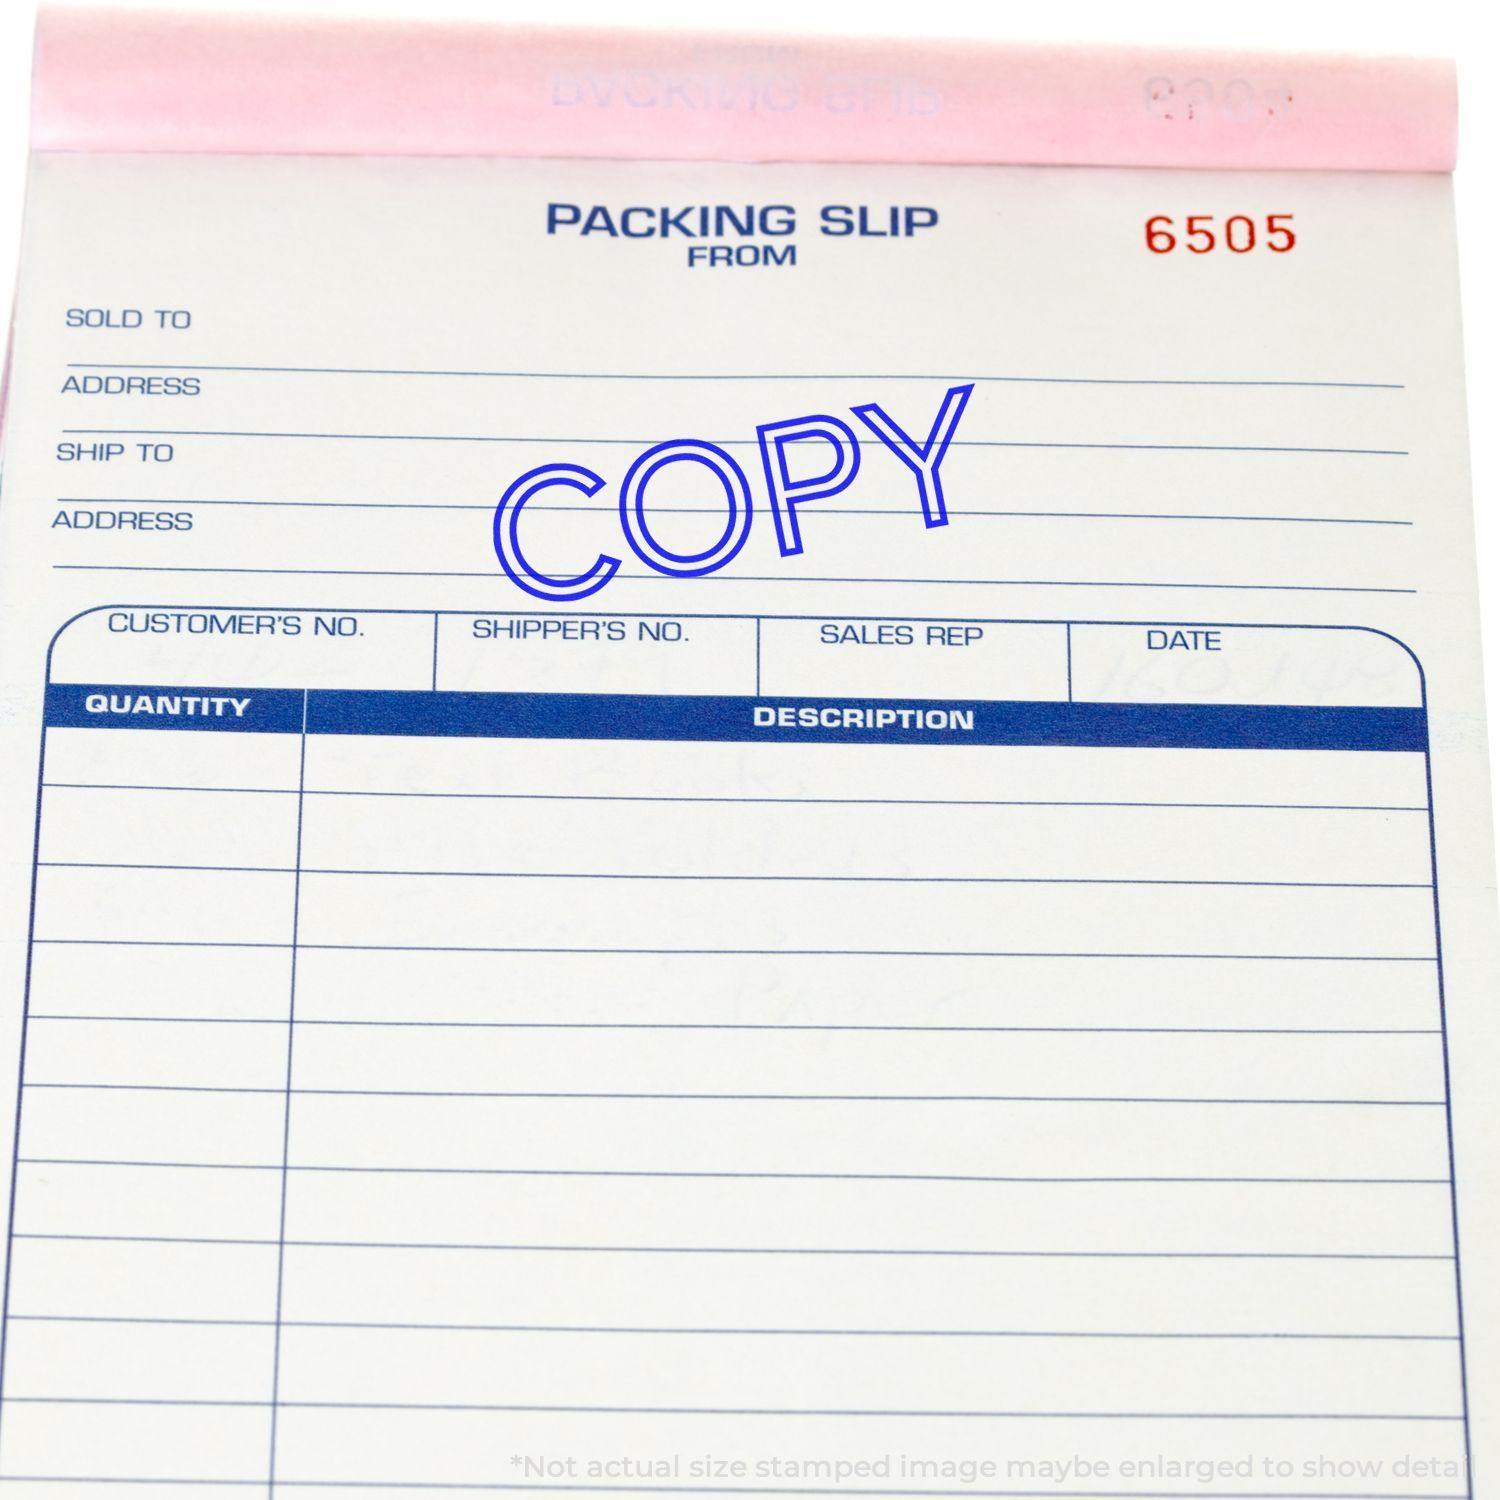 A stock office rubber stamp with a stamped image showing how the text "COPY" in an outline font is displayed after stamping.